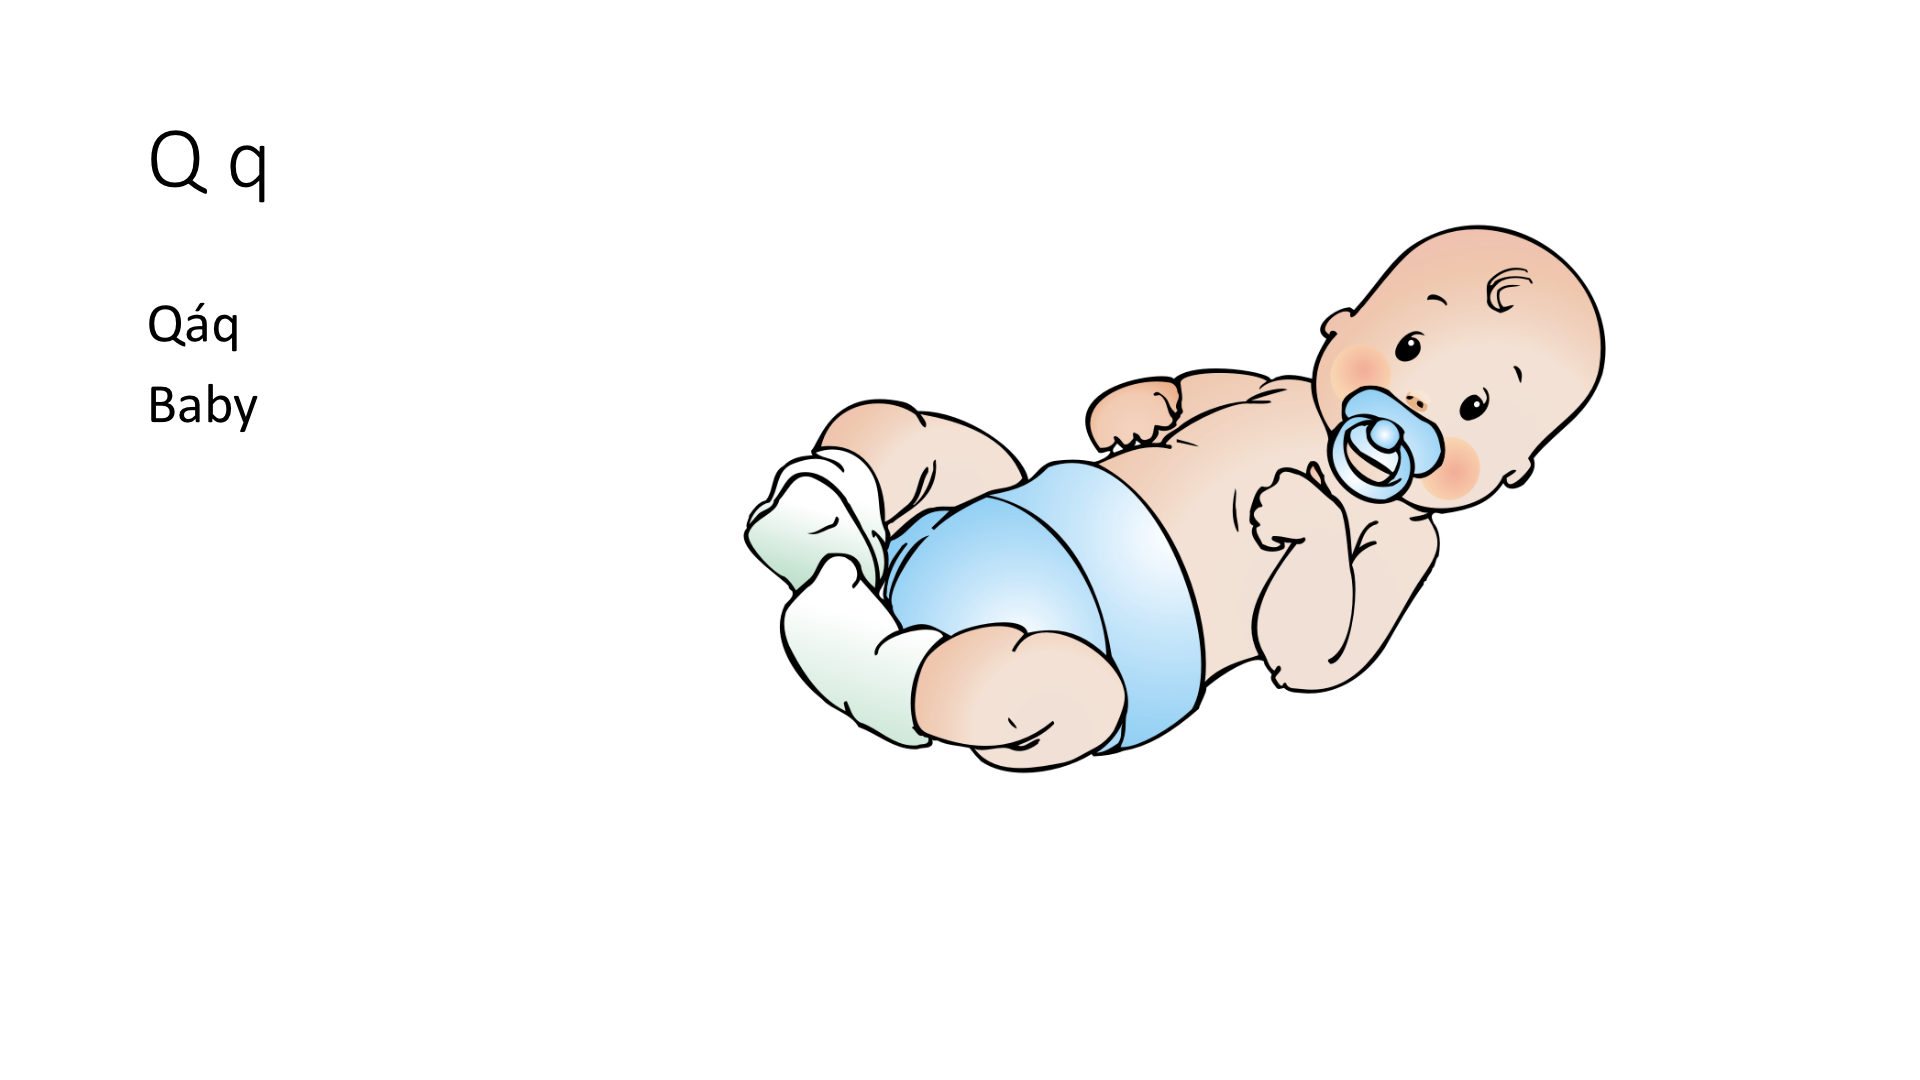 Illustration of a baby